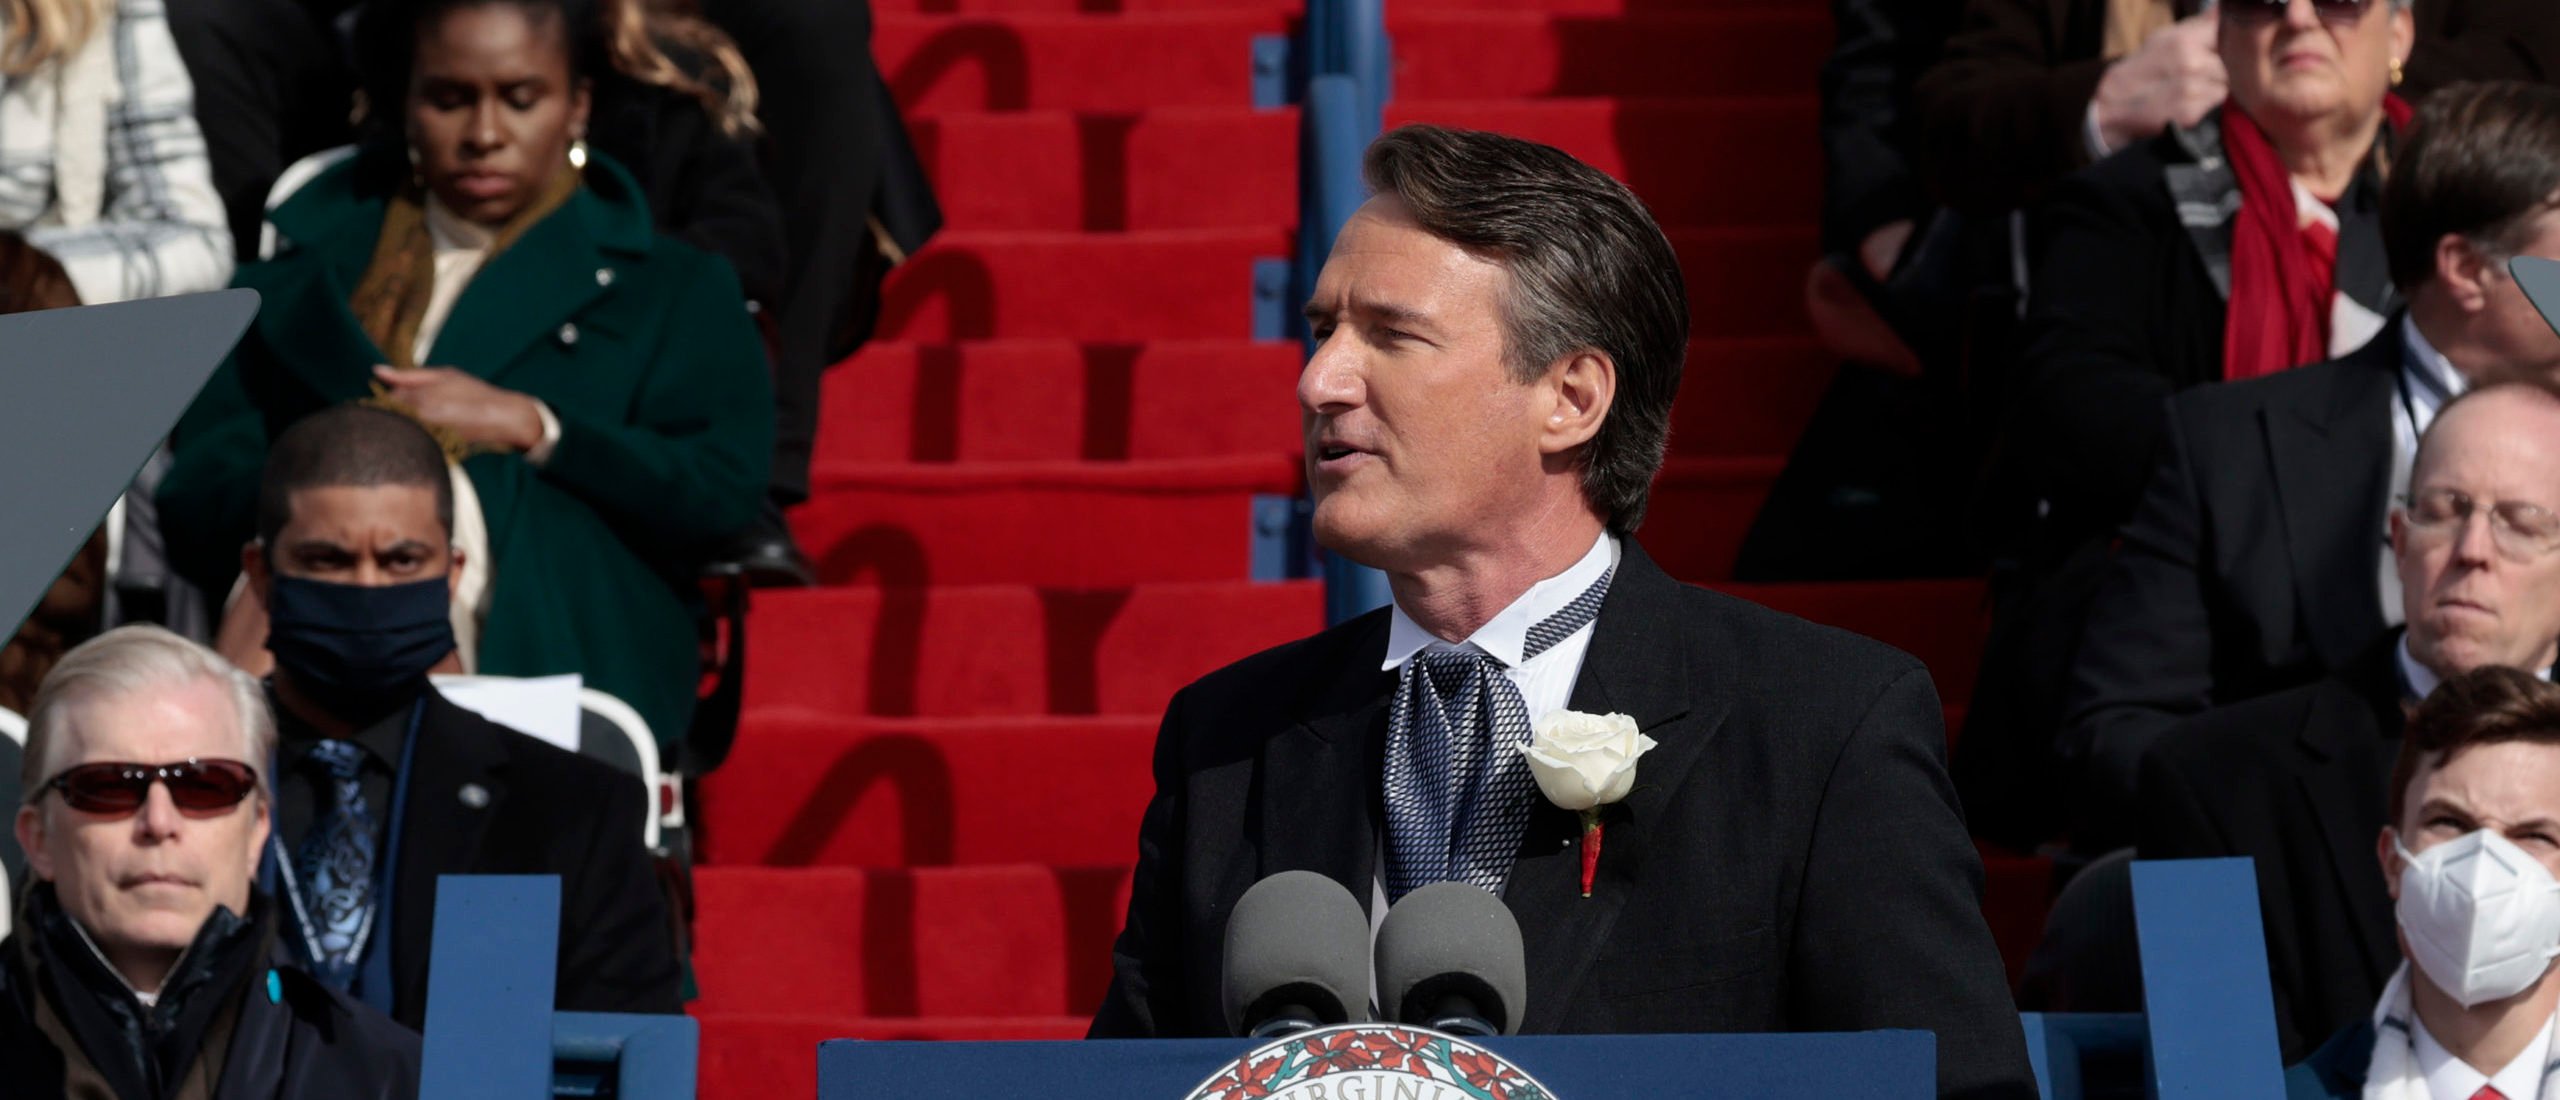 Virginia Governor Glenn Youngkin gives the inaugural address after being sworn in as the 74th governor of Virginia on the steps of the State Capitol on January 15, 2022 in Richmond, Virginia.